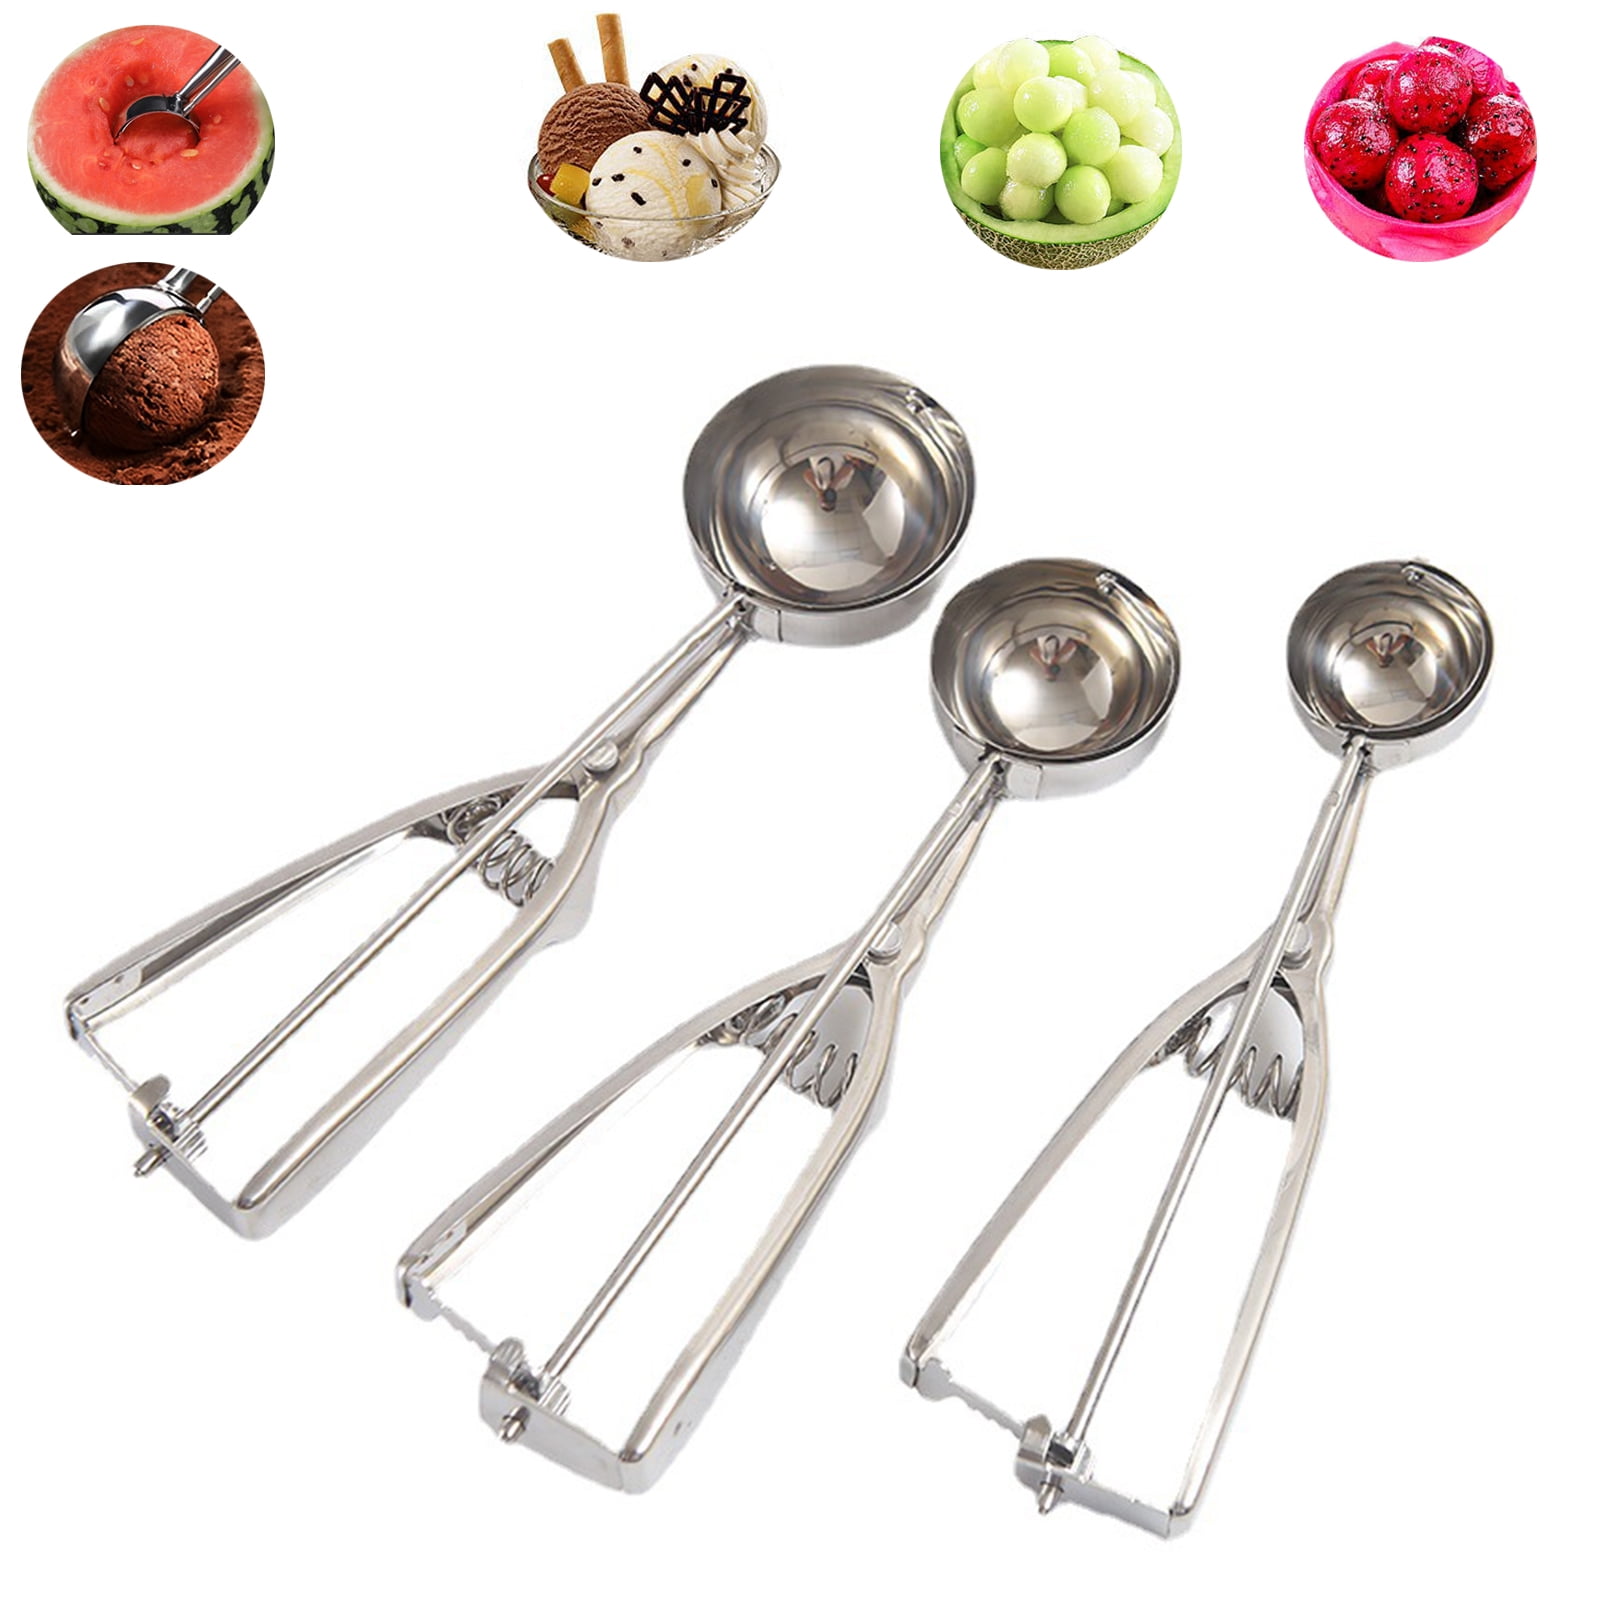 1pcs Ice Cream Scoops Metal Stainless Steel Make Kitchen Tools 4/5/6 Cm 3  Size For Choose Potato Watermelon Spoon - Ice Cream Tools - AliExpress